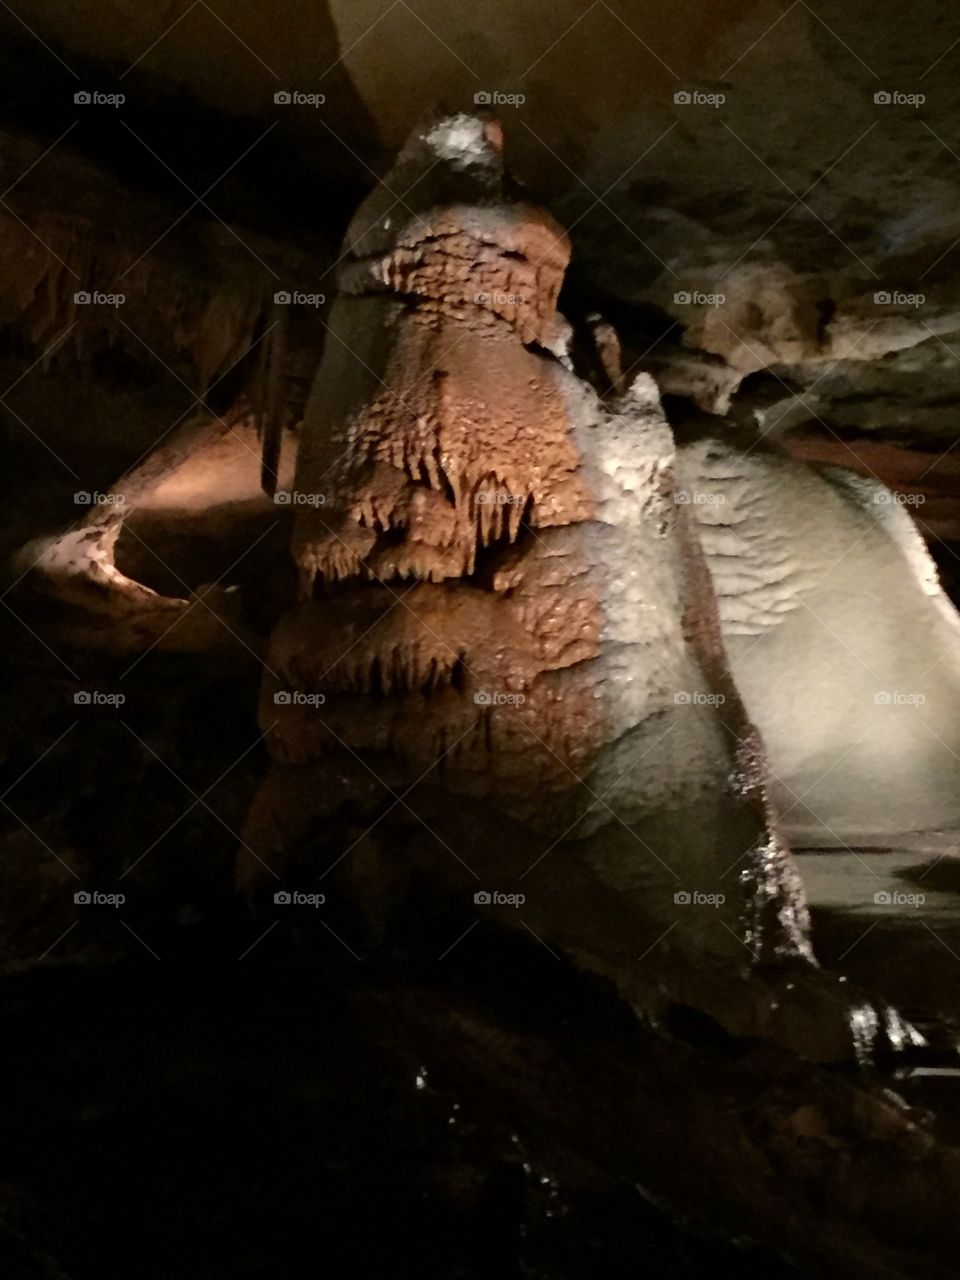 Do you see the face in this cave????????????